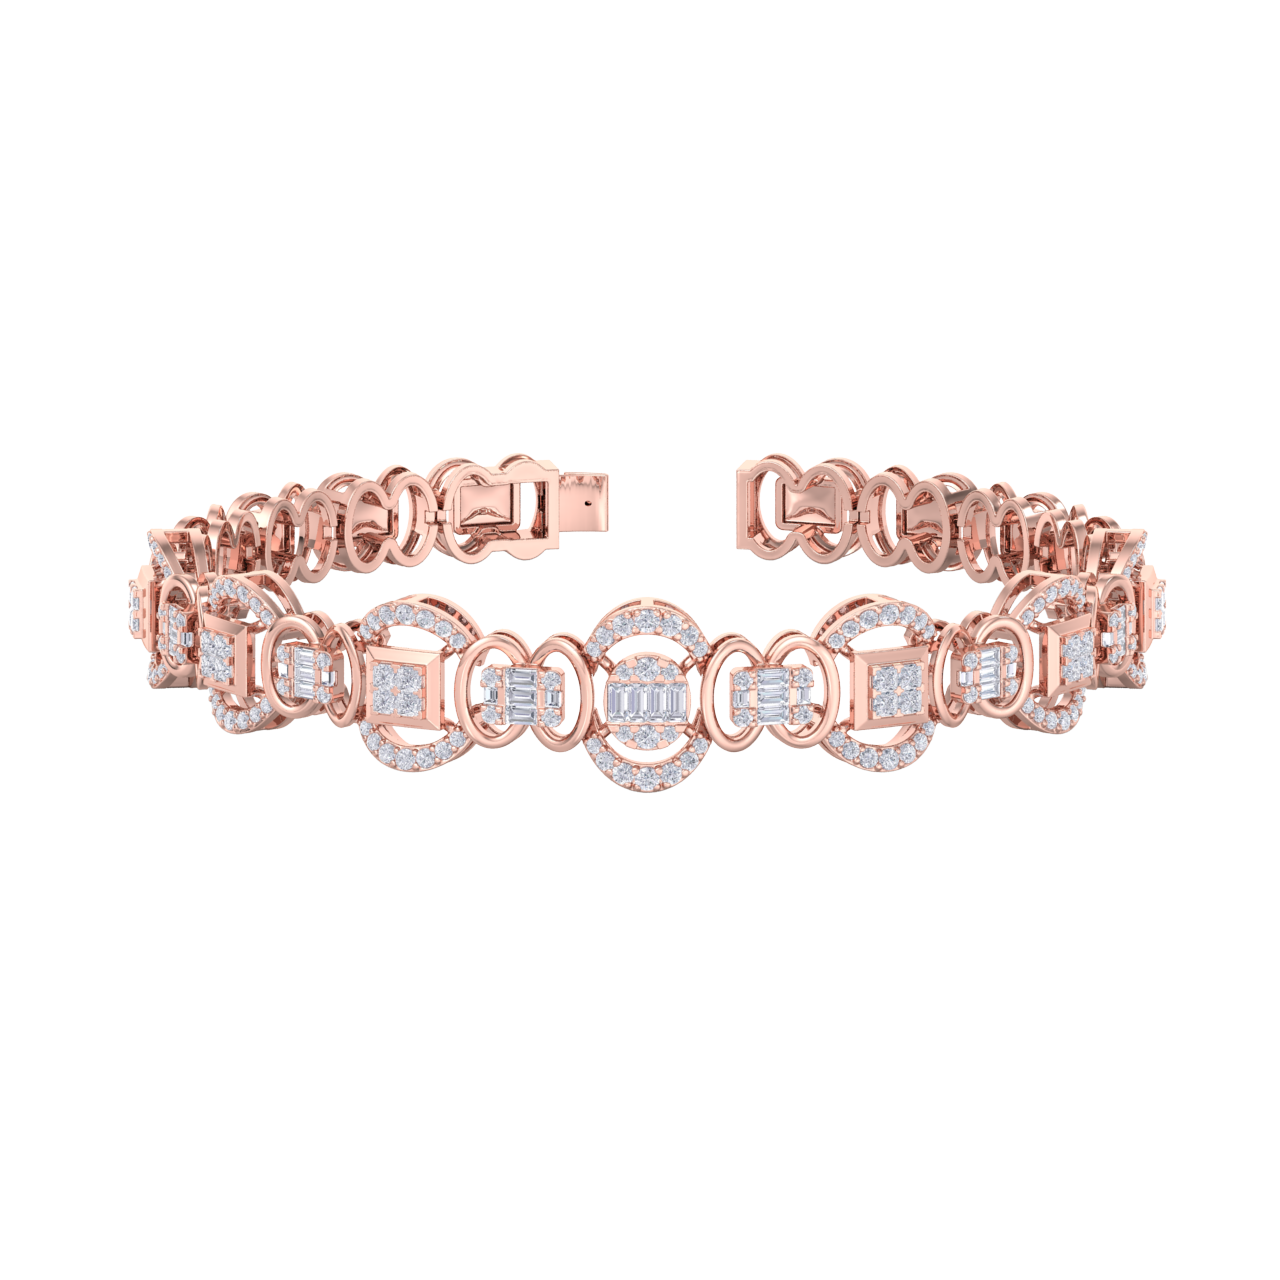 Statement bracelet in yellow gold with white diamonds of 1.77 ct in weight